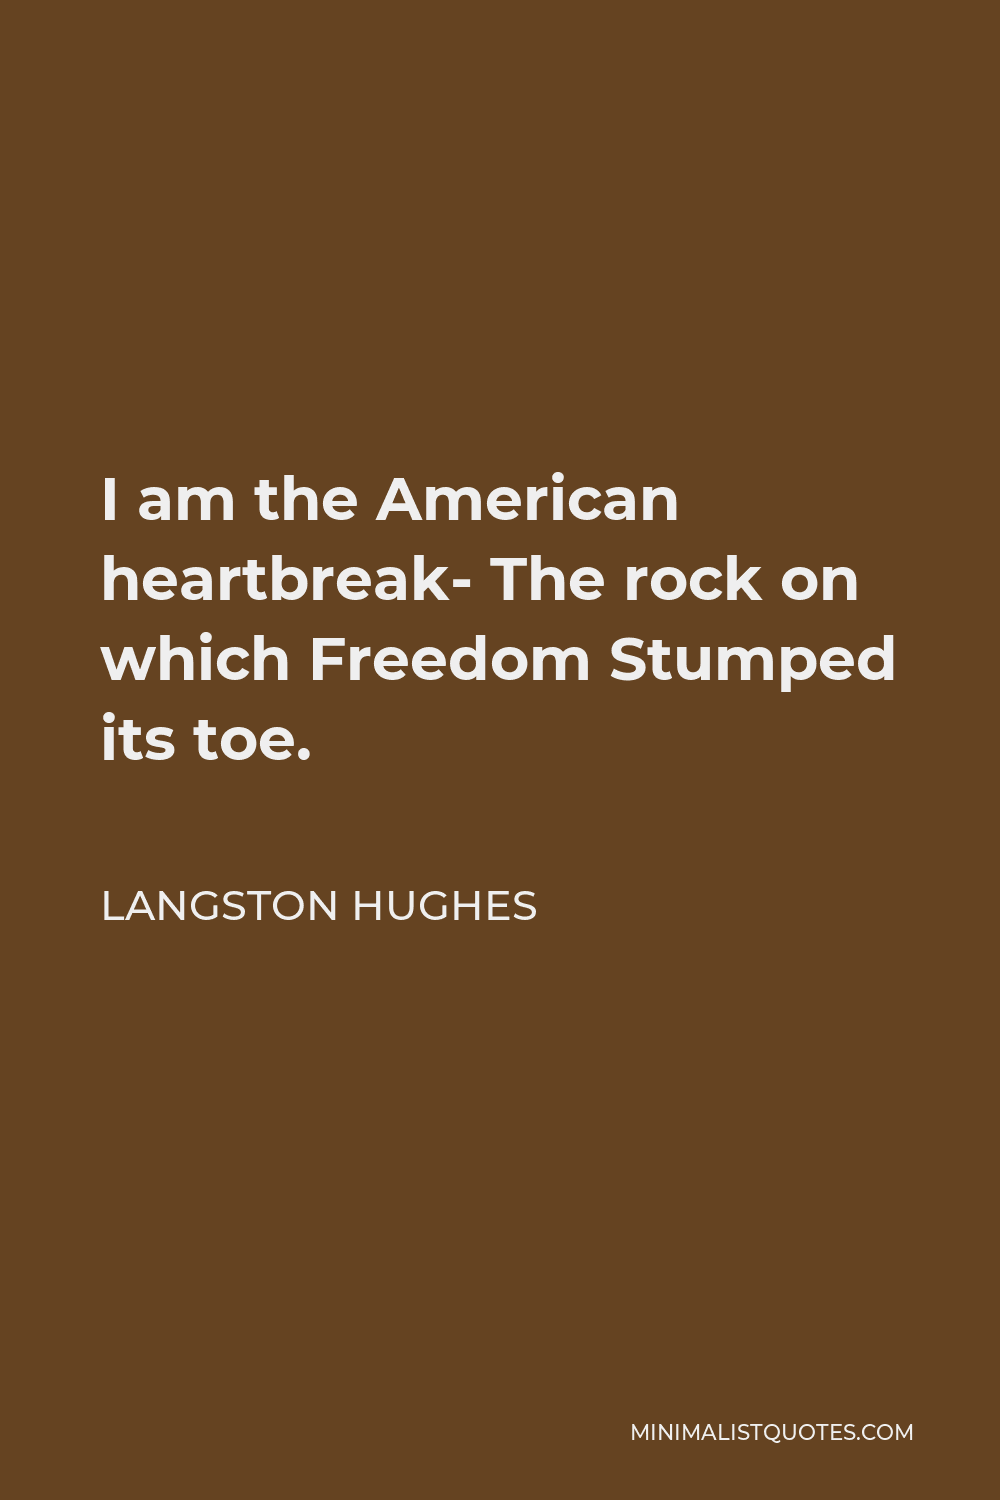 Langston Hughes Quote - I am the American heartbreak- The rock on which Freedom Stumped its toe.